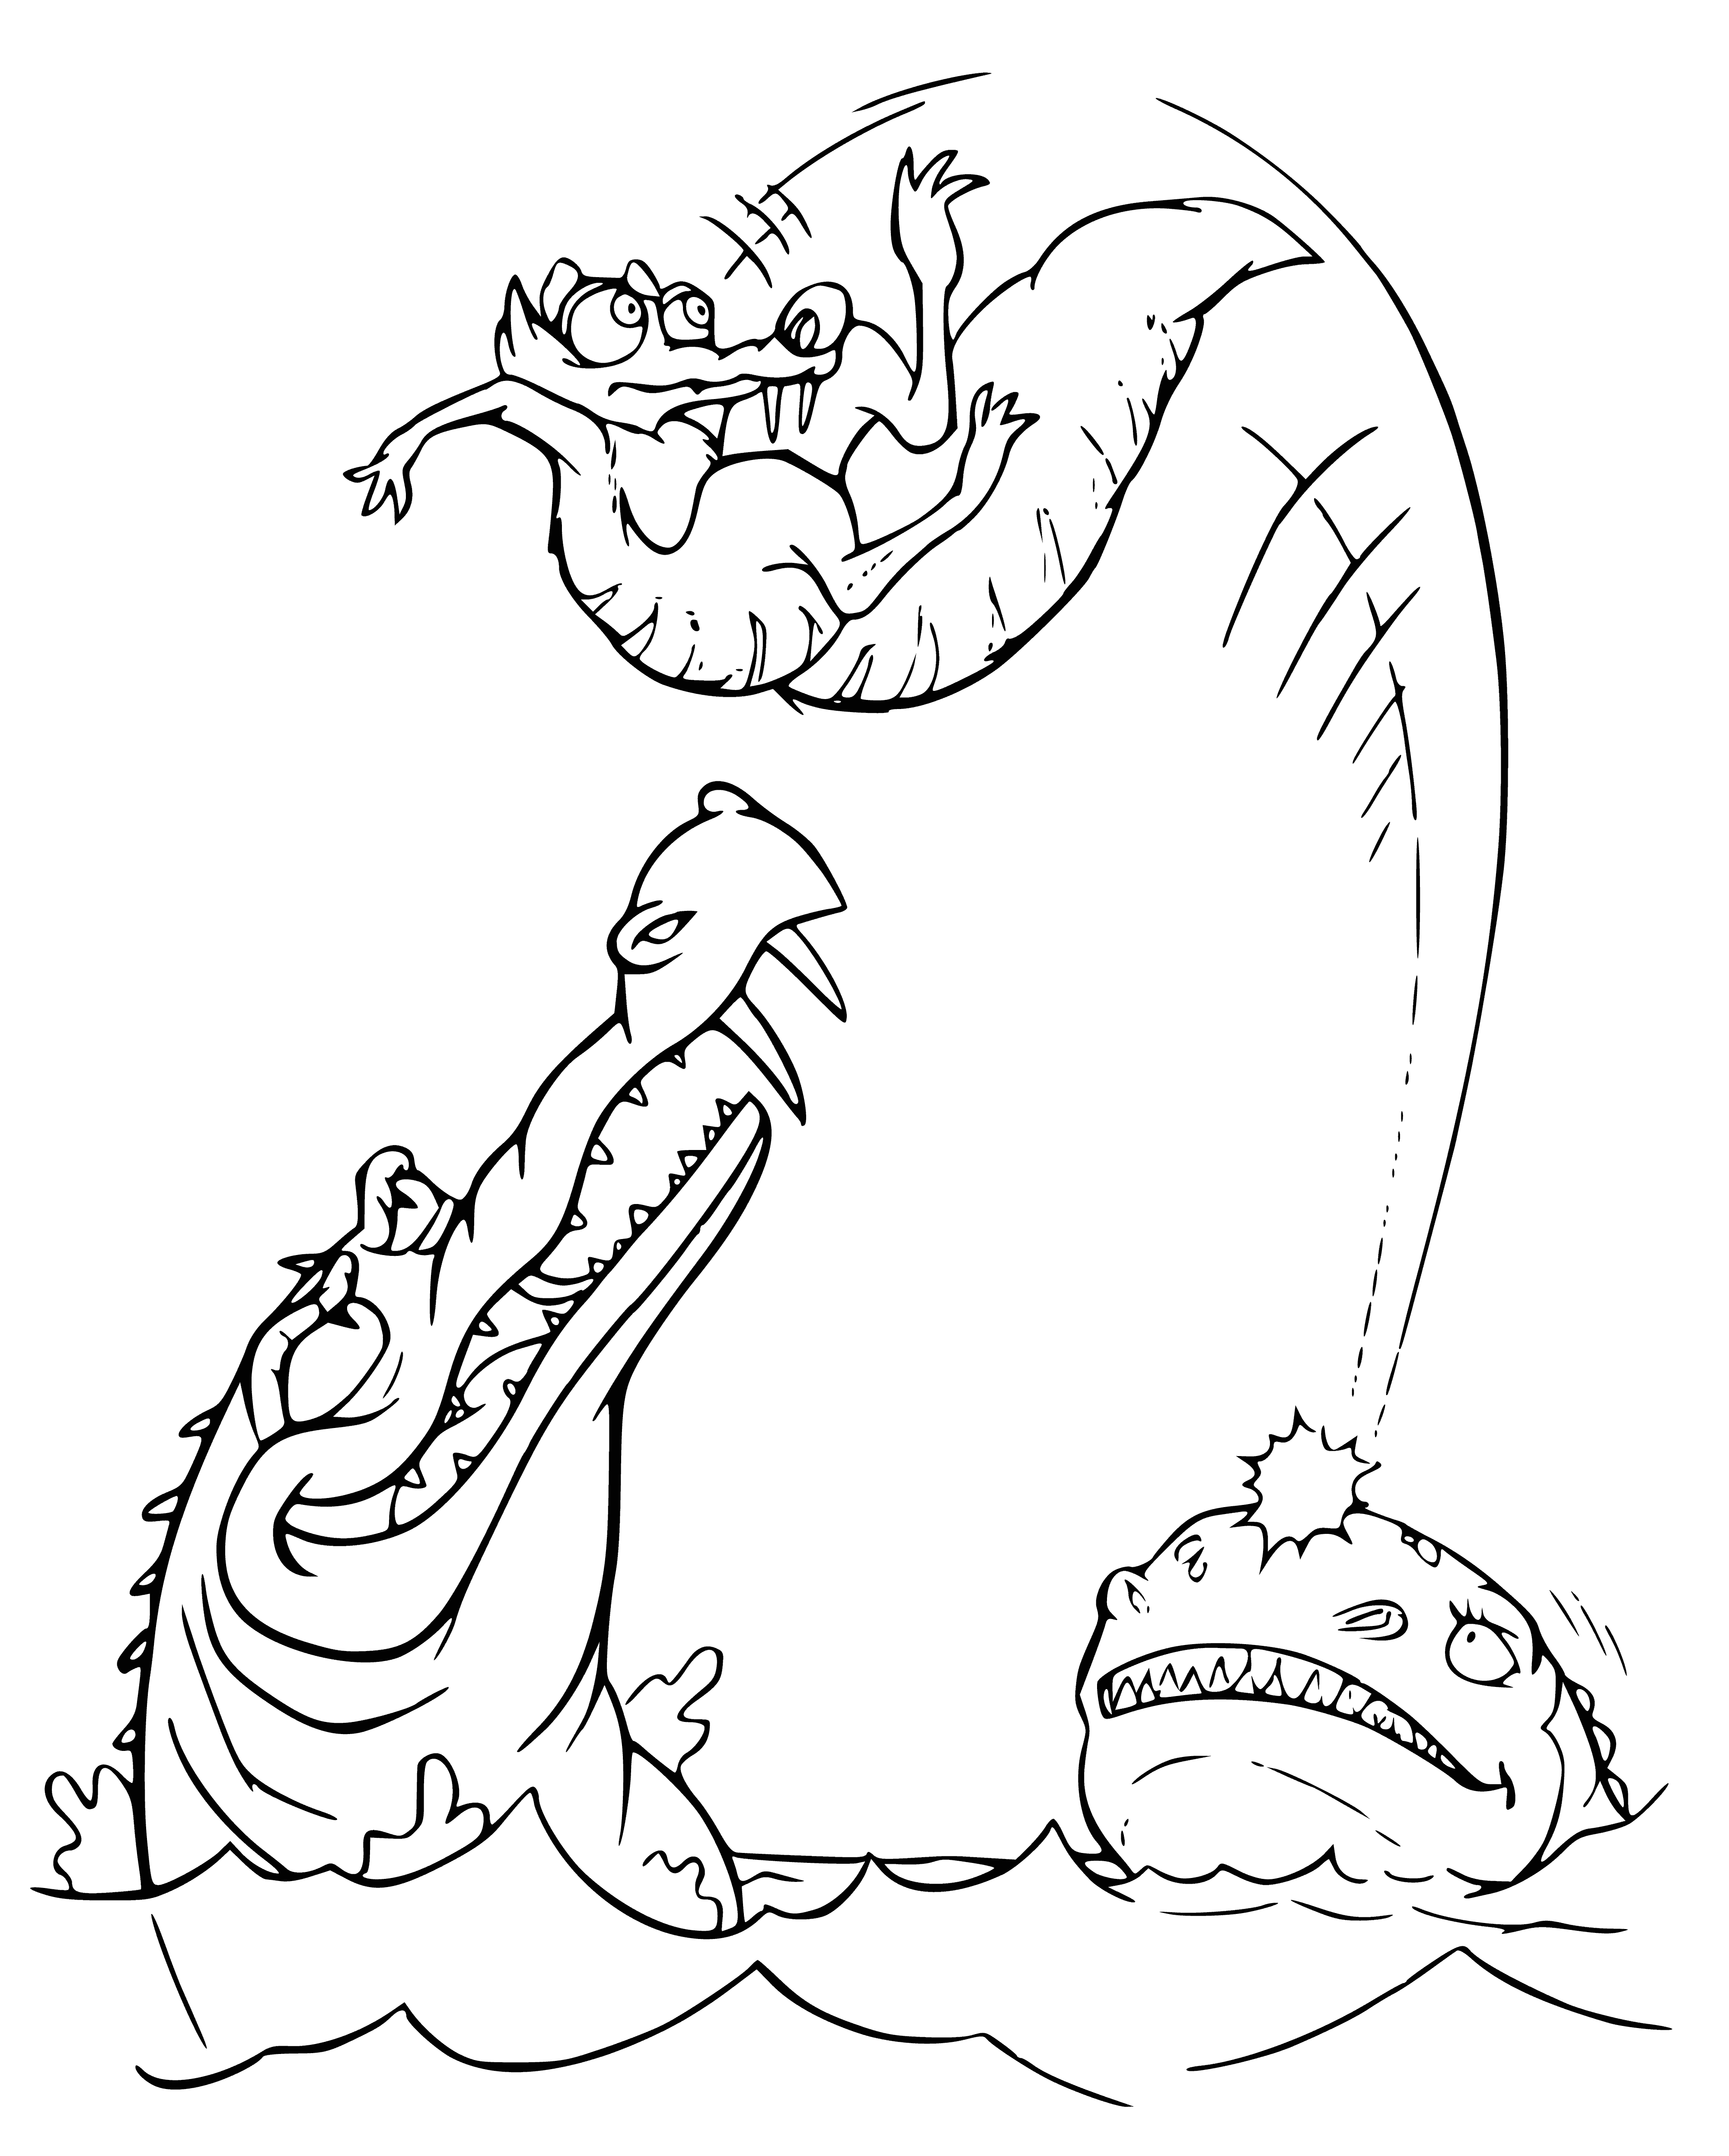 coloring page: Two reptiles stare at a squirrel holding a giant acorn in a coloring page.